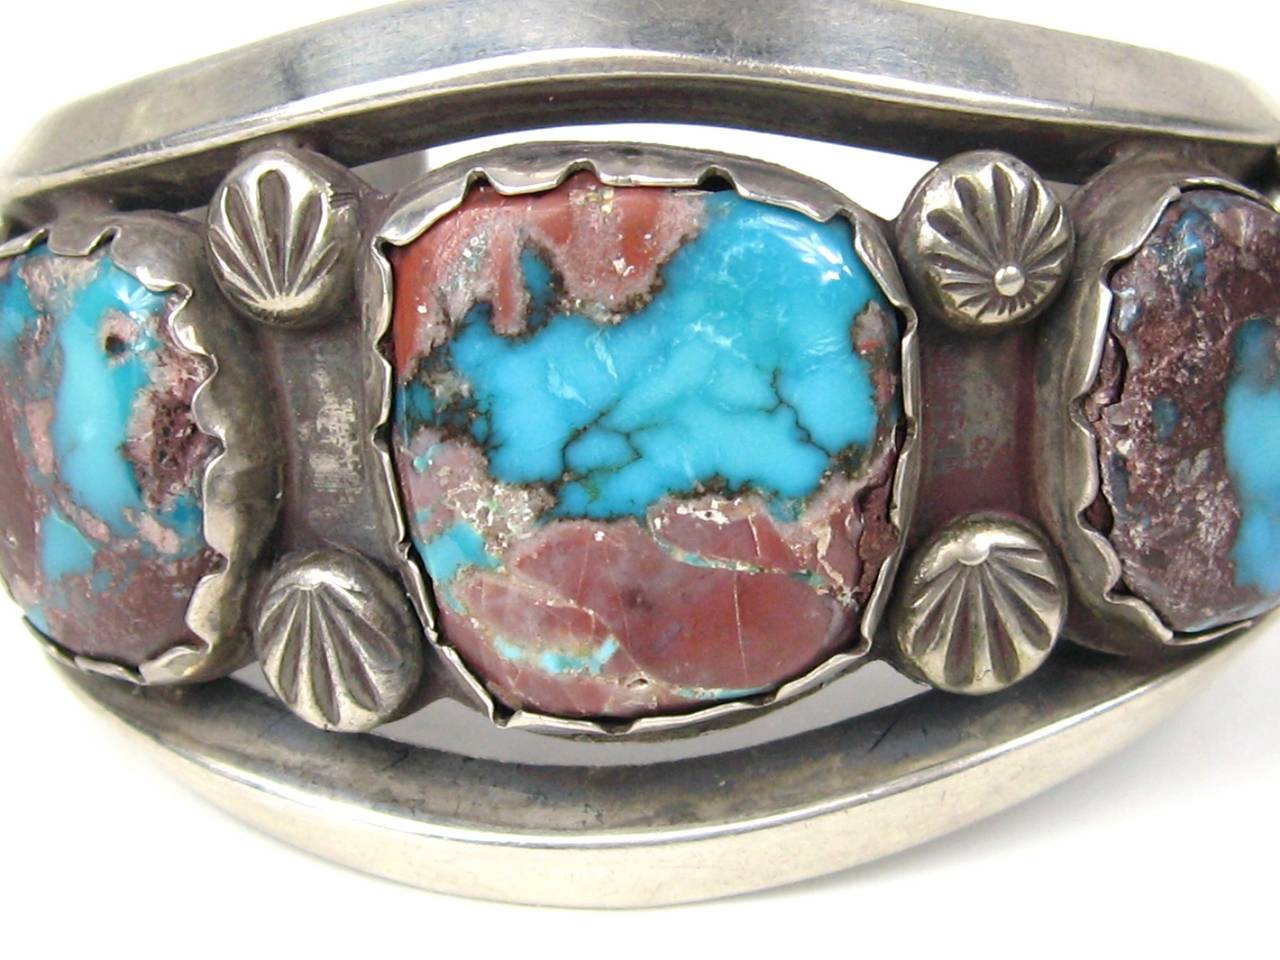 Three stone Turquoise & Brown Matrix Old pawn Cuff. Measure approximately 1.60 in wide down to .70 in. Opening 1.52 in. Will fit a 6.5 to 7.5 wrist Hallmarked on the inside RHY. This is out of a massive collection of Hopi, Zuni, Navajo,